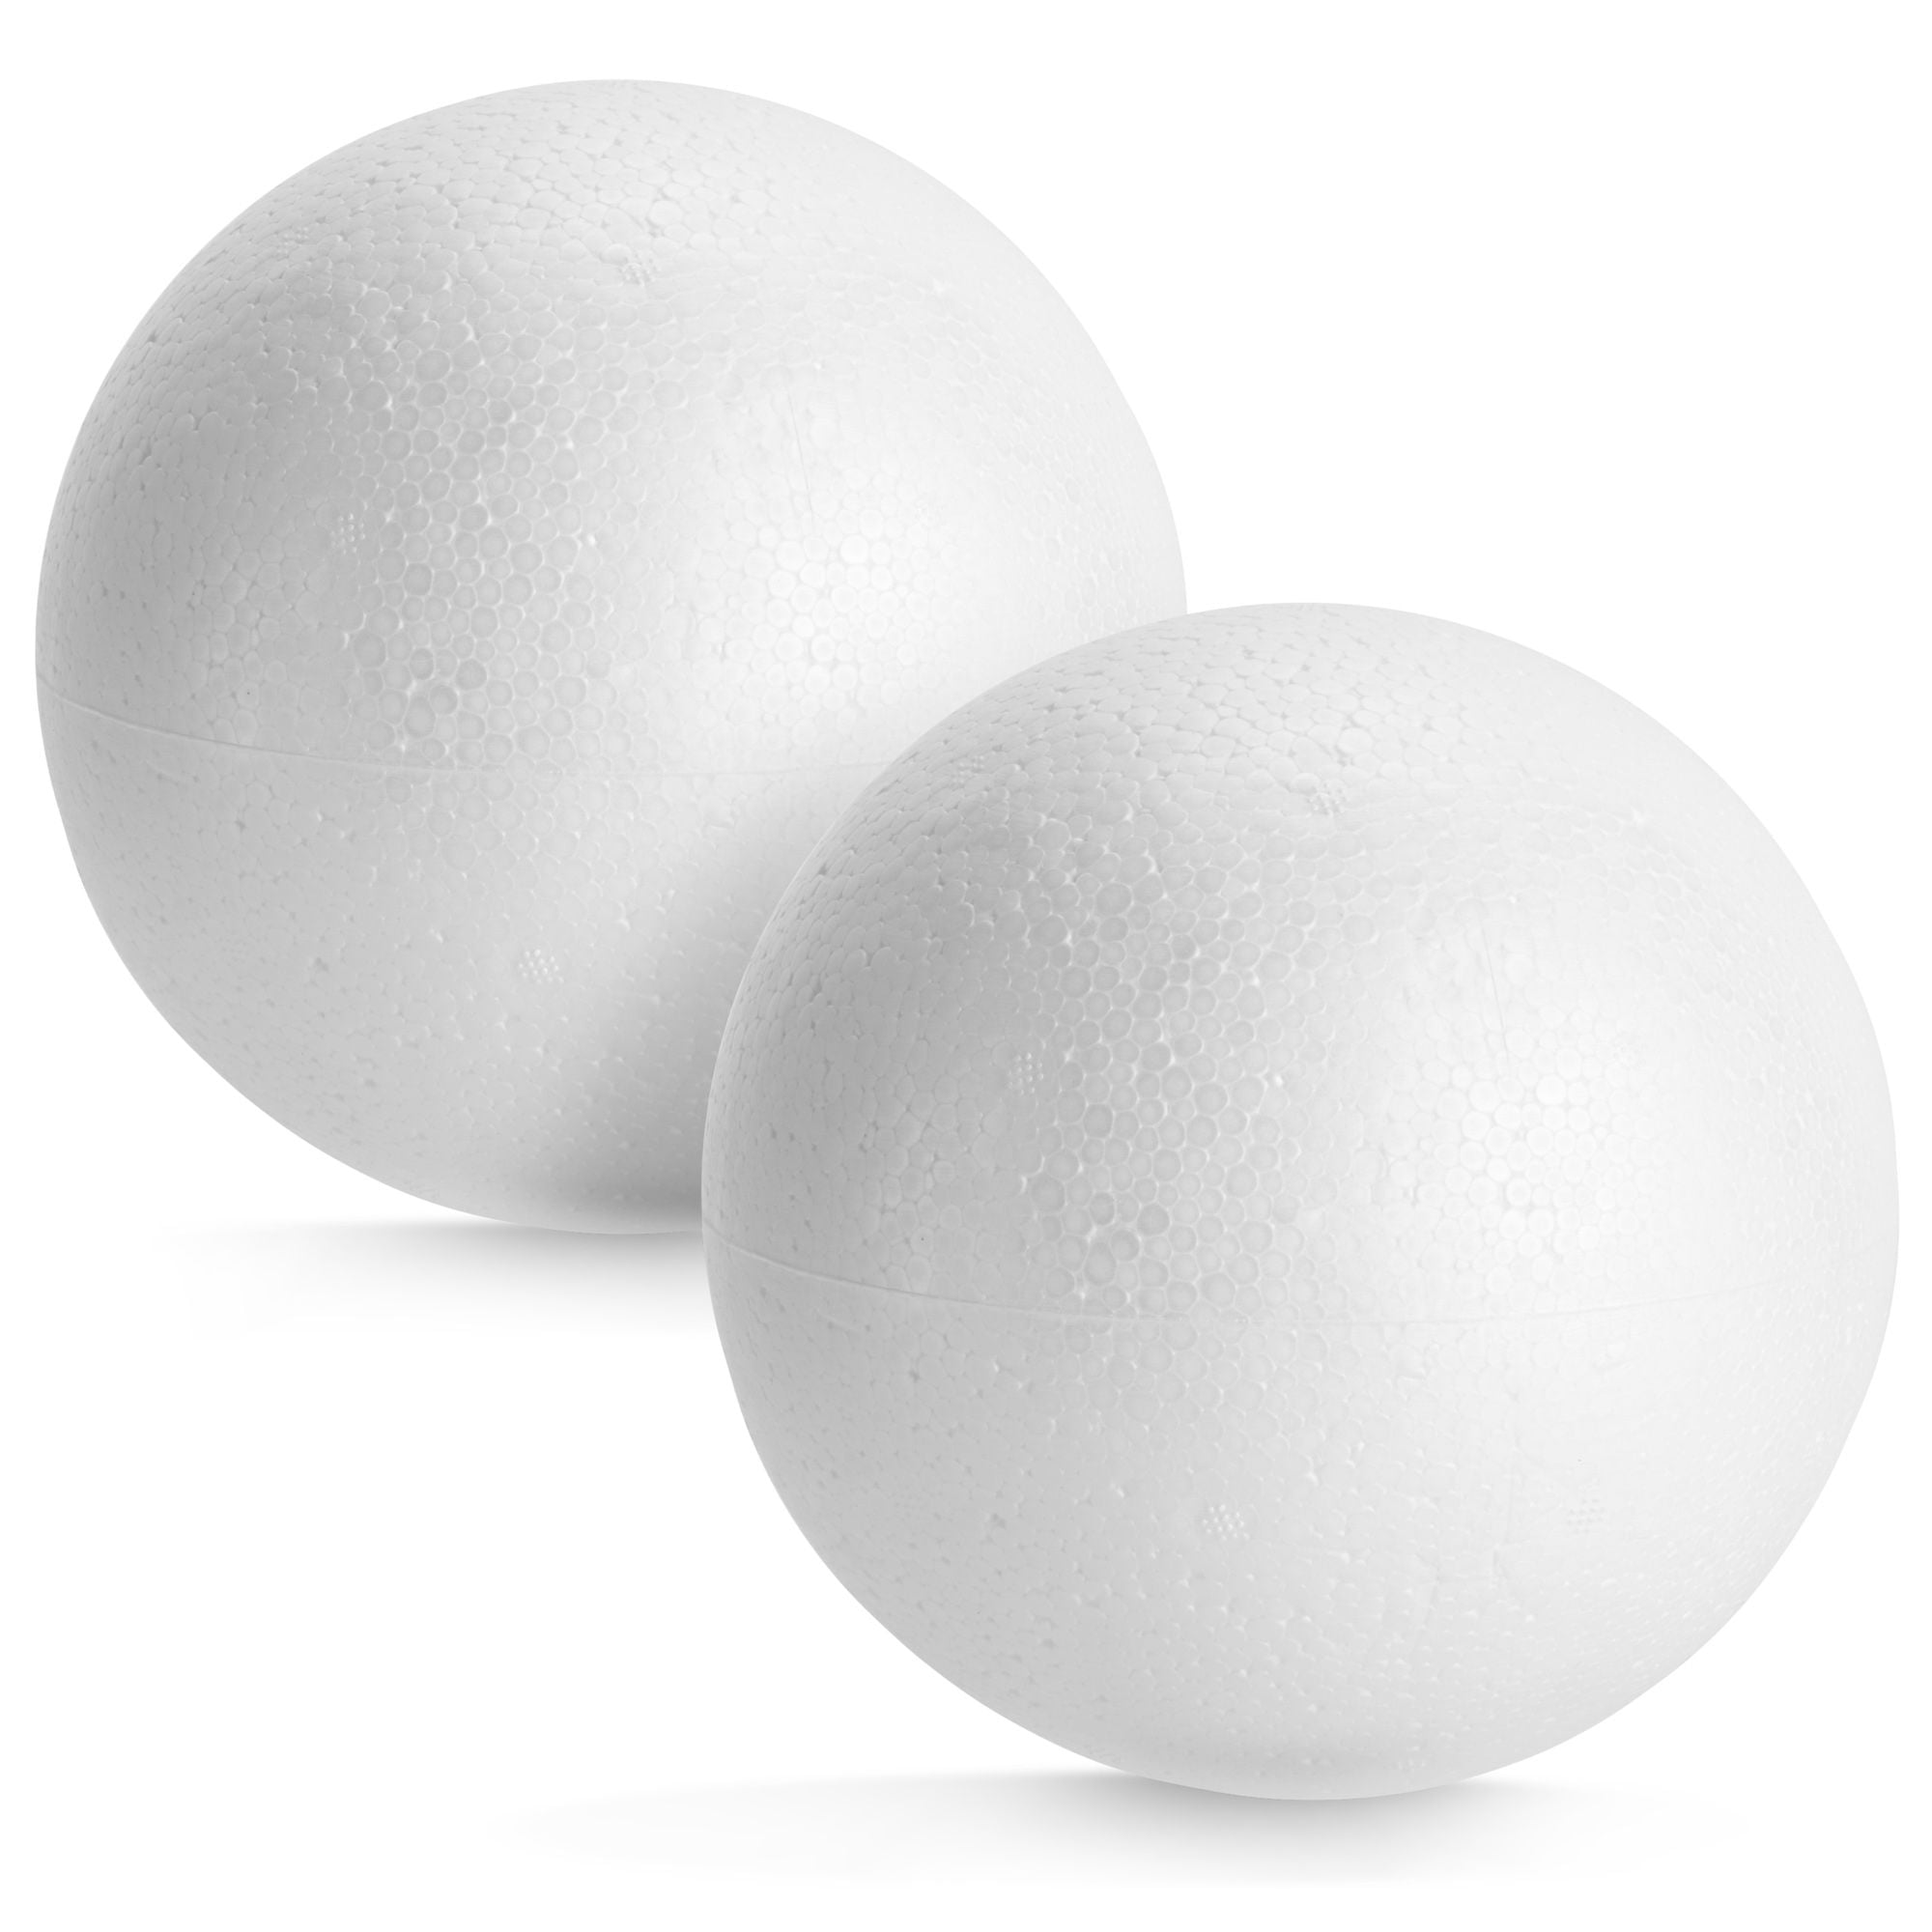 Juvale 2 Pack Foam Balls For Crafts, 6-inch Round Whitepolystyrene